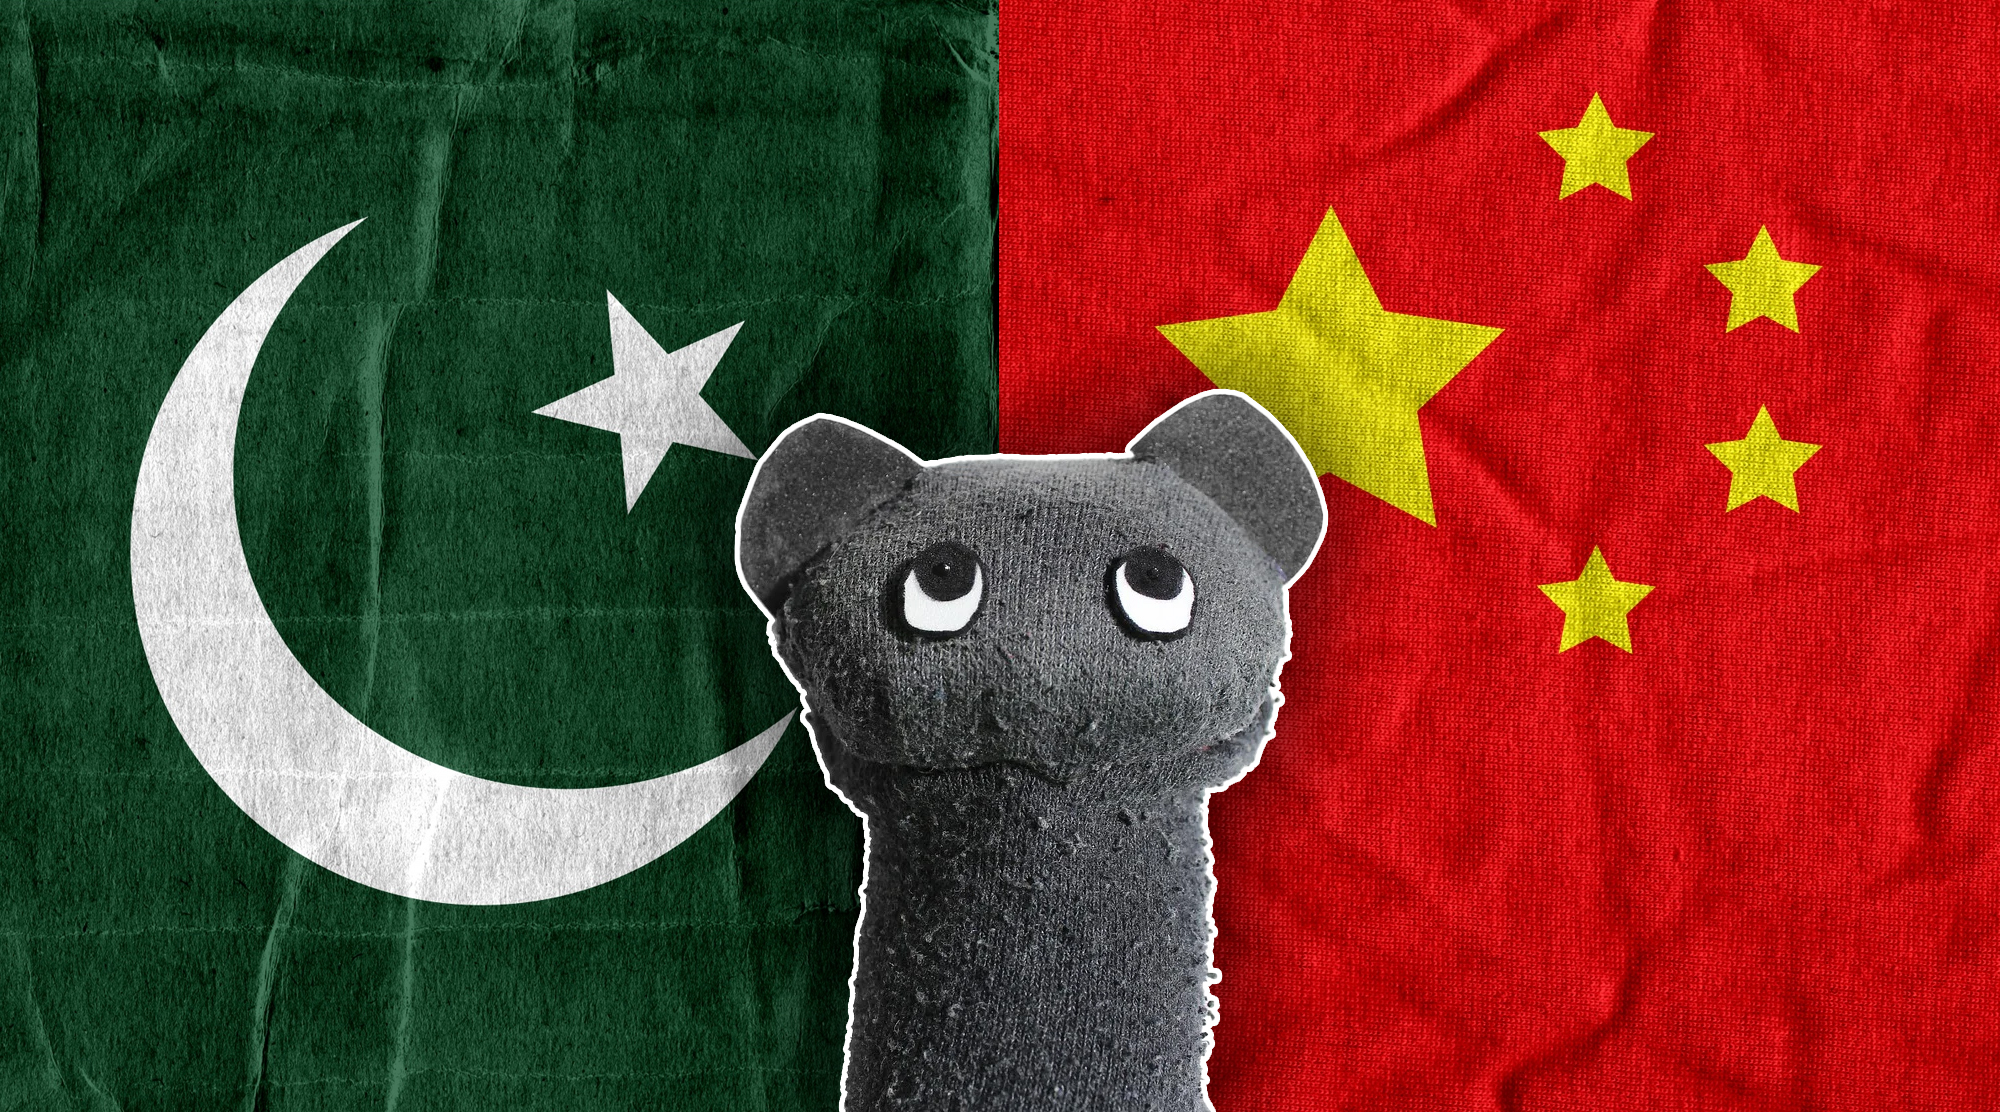 The Case of the Pakistani Sockpuppets